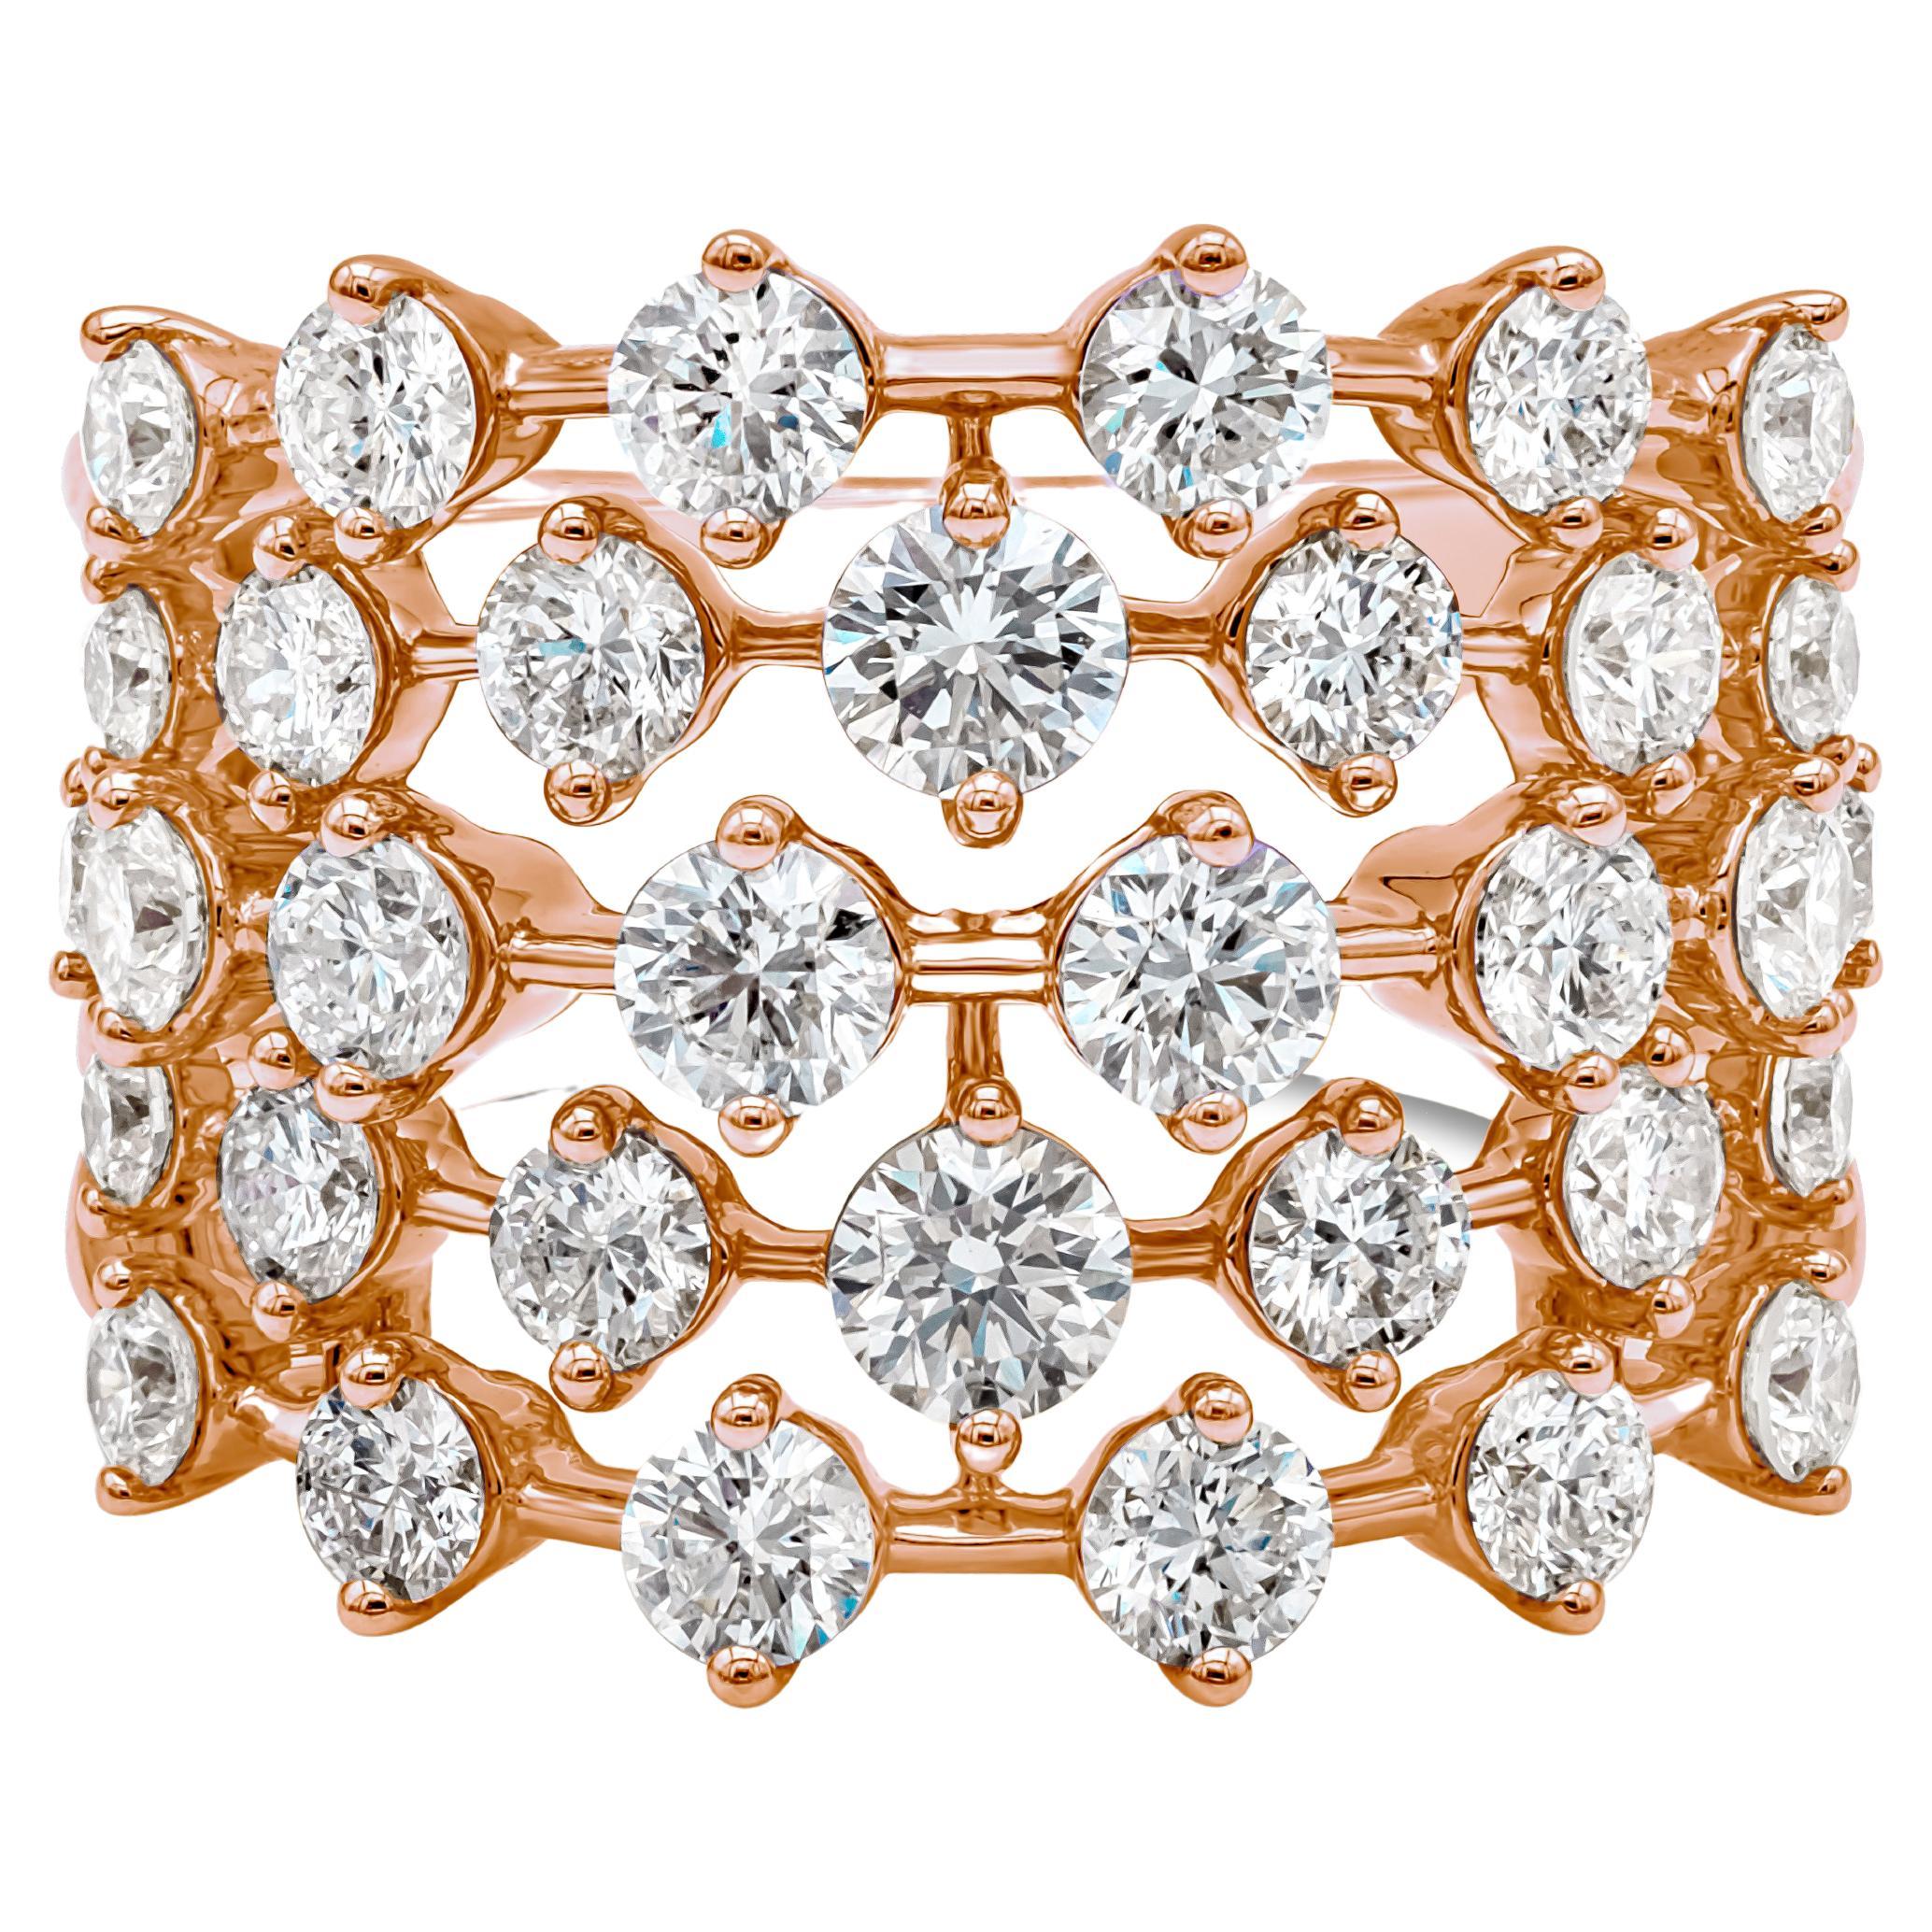 Roman Malakov 2.71 Carat Total Round Diamond Wide Fashion Ring in Rose Gold For Sale